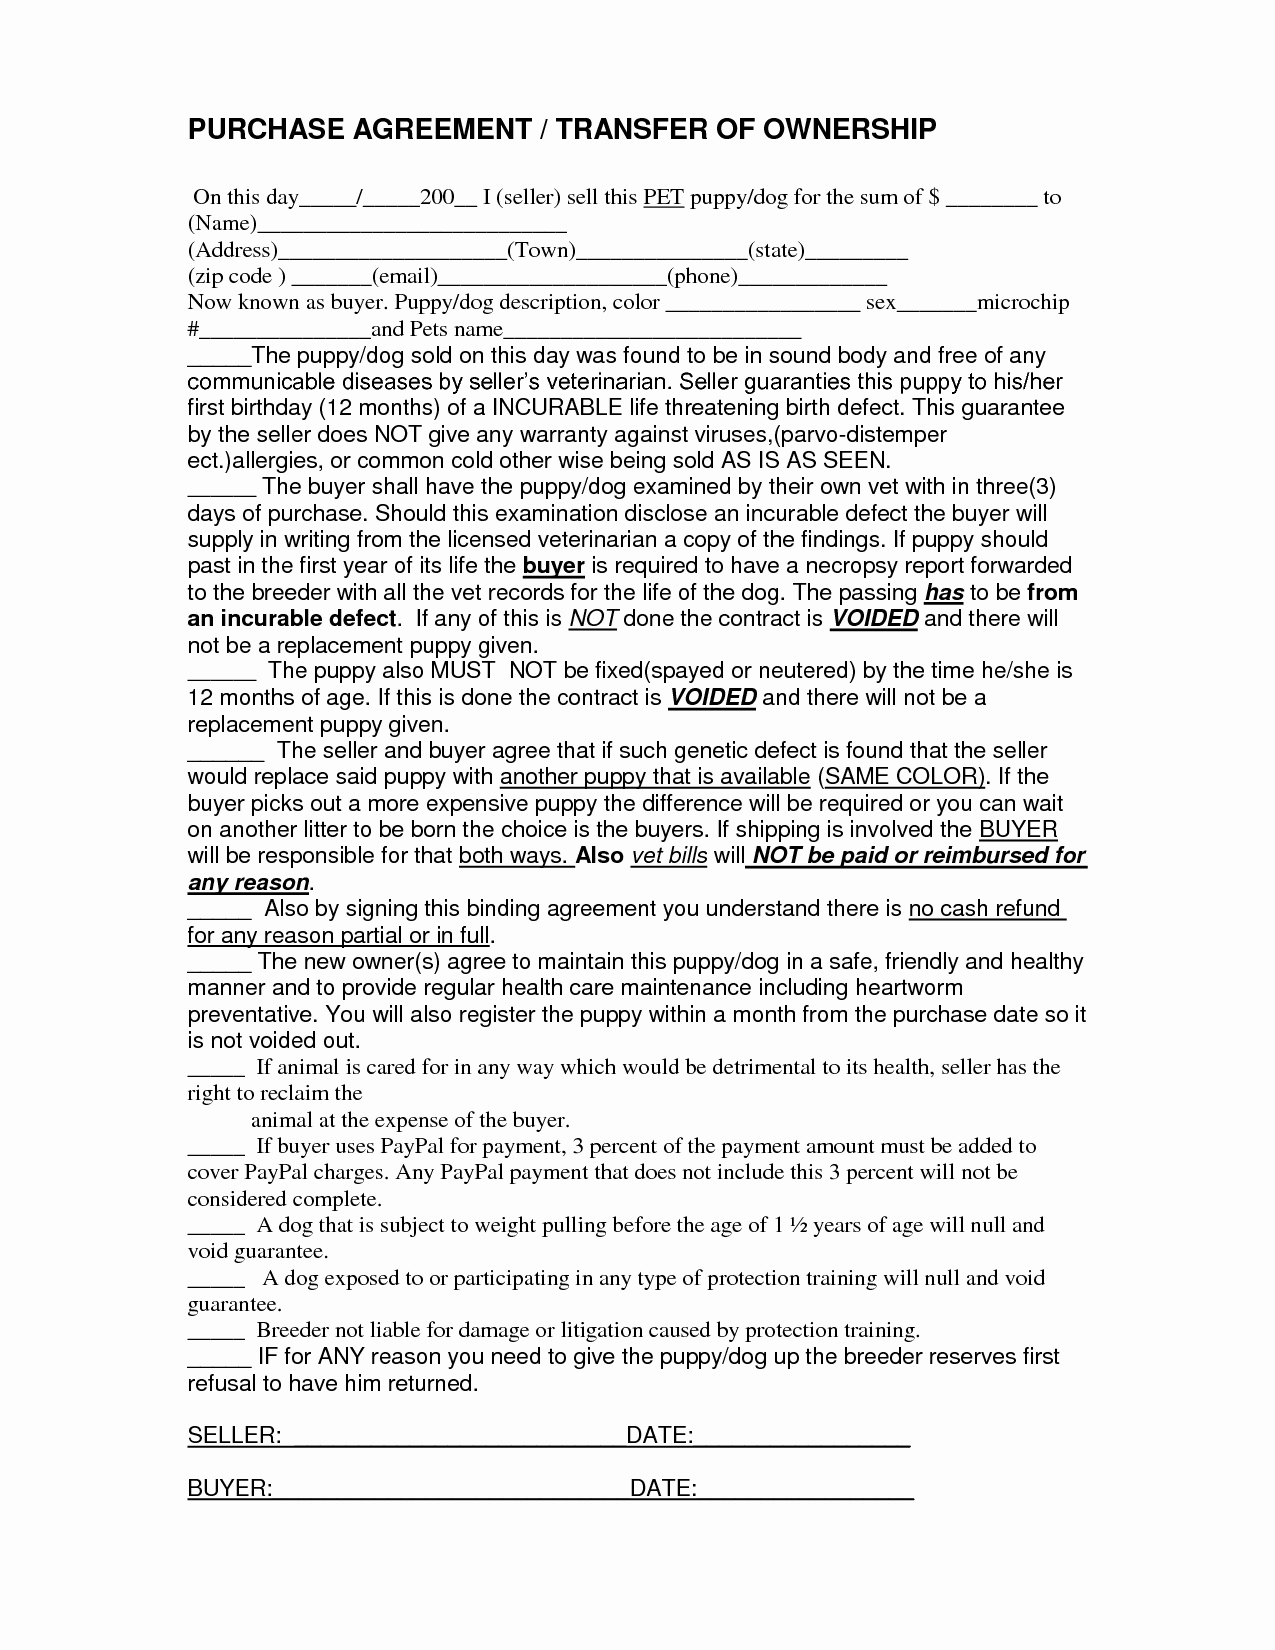 Purchase Agreement Template Free New for Sale by Owner Purchase Agreement